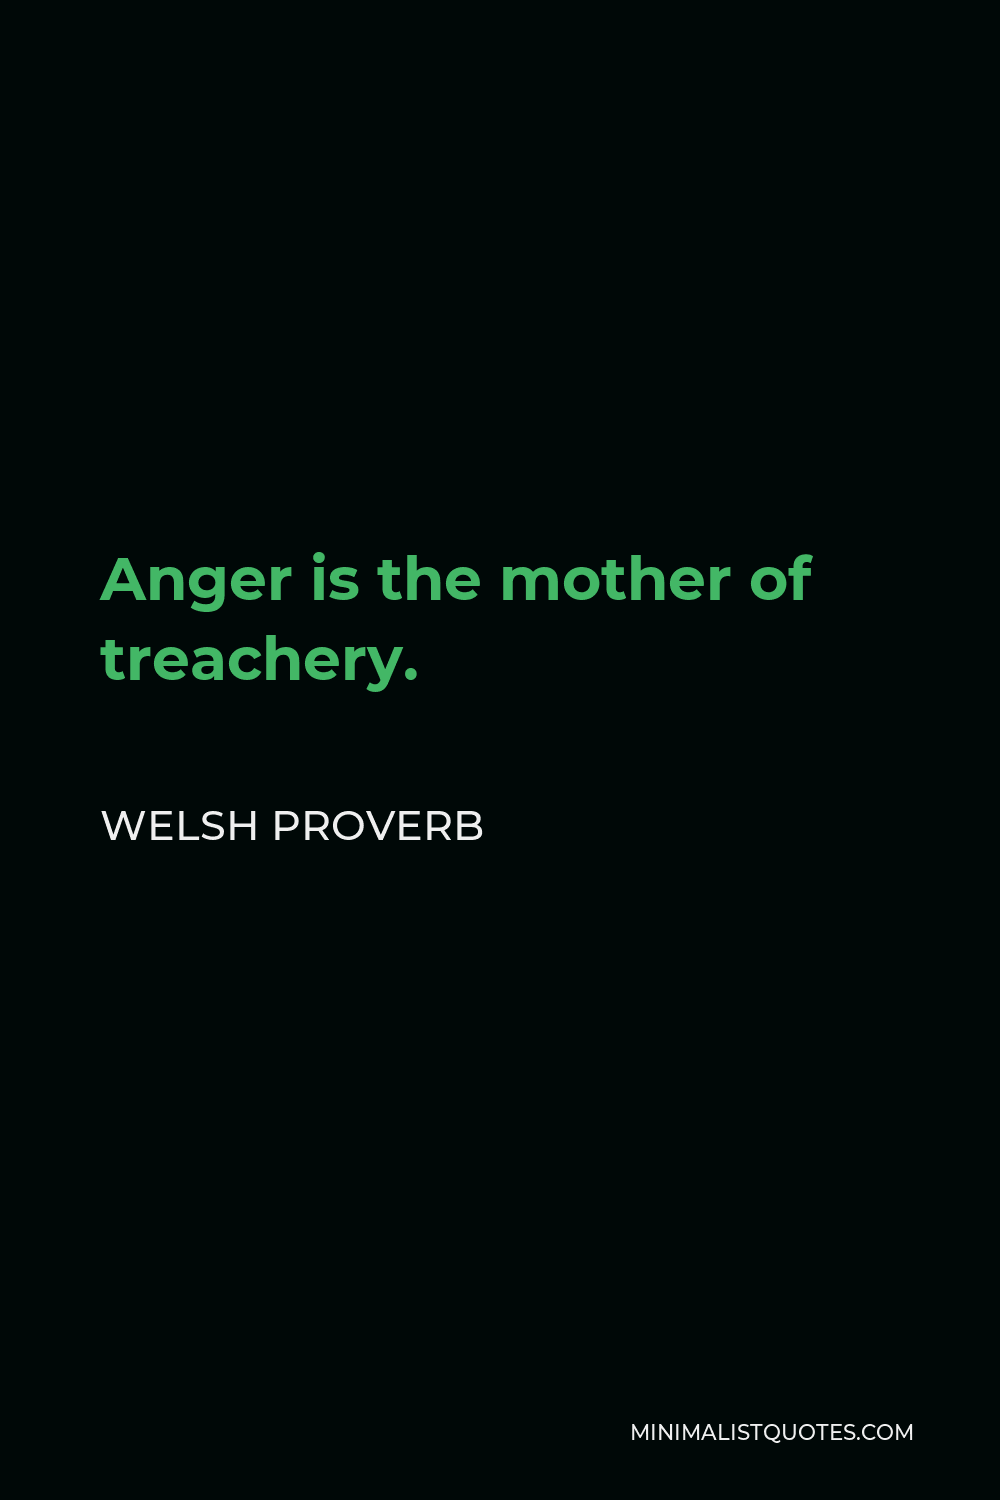 Welsh Proverb Quote - Anger is the mother of treachery.